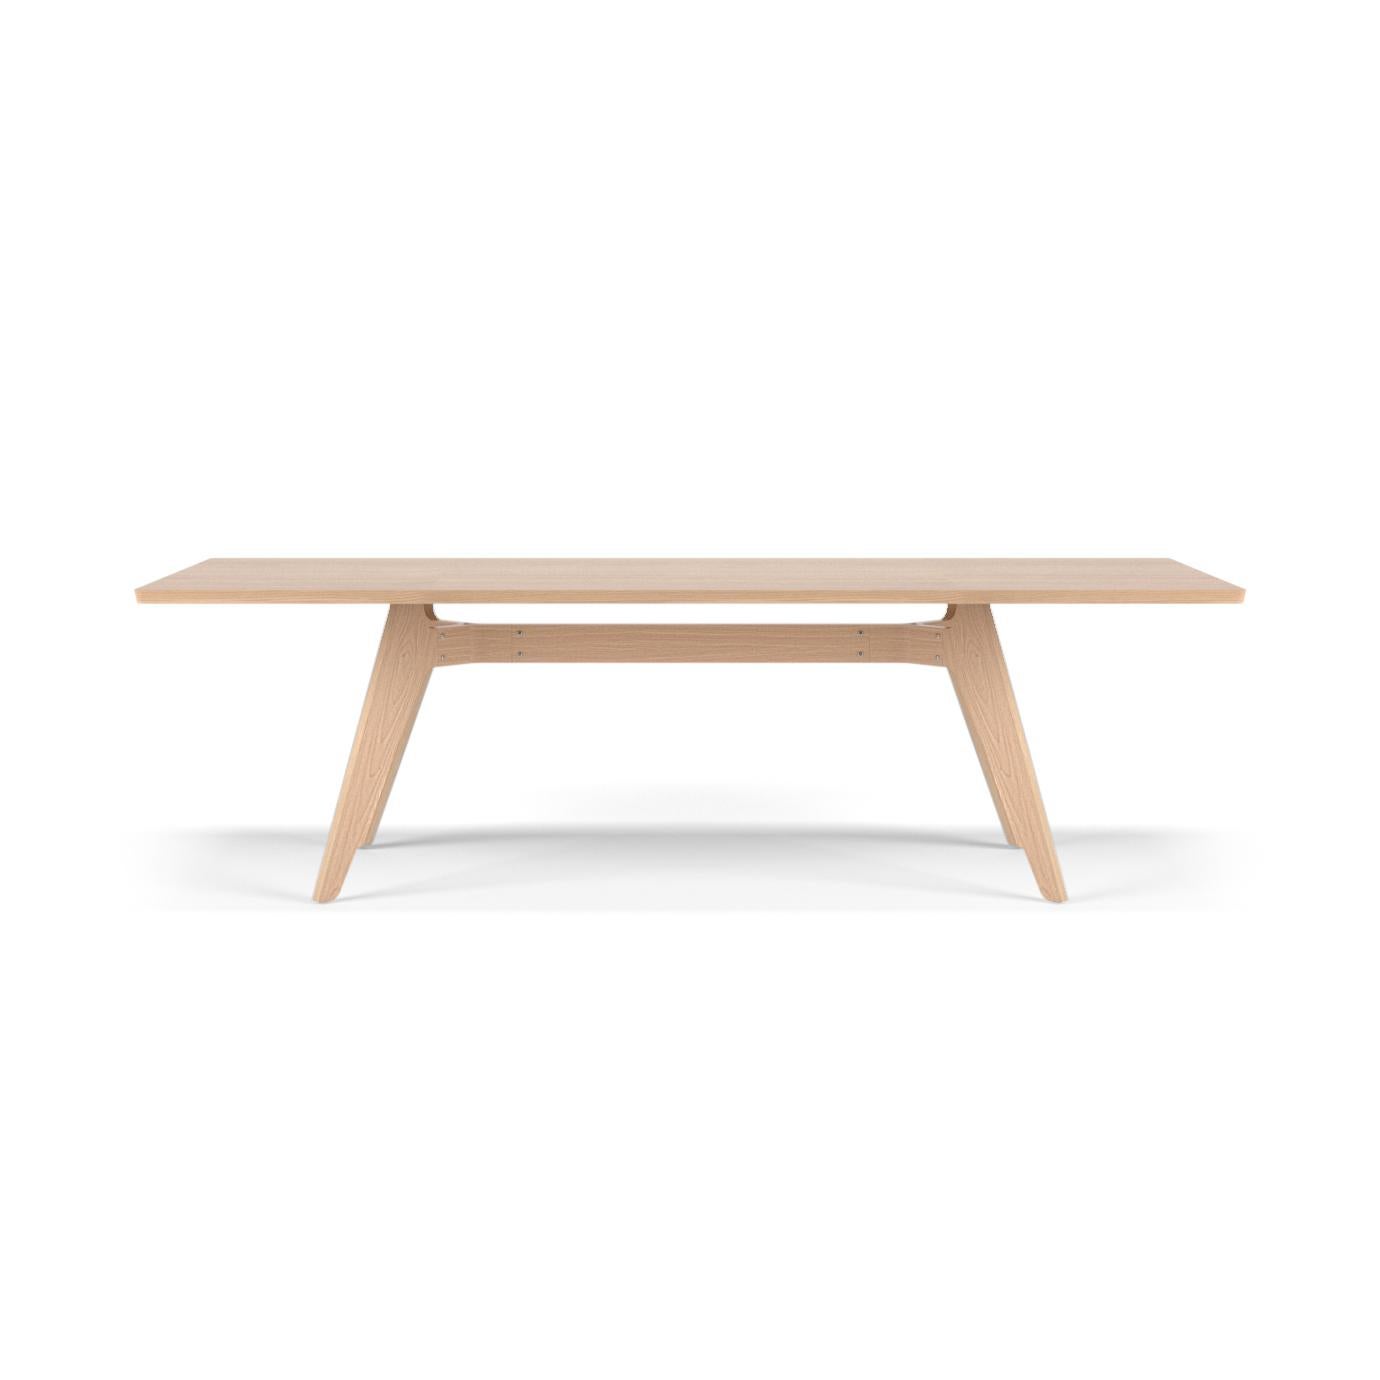 Modern Dining Table 'Lavitta' by Poiat, Oak, 240 cm In New Condition For Sale In Paris, FR